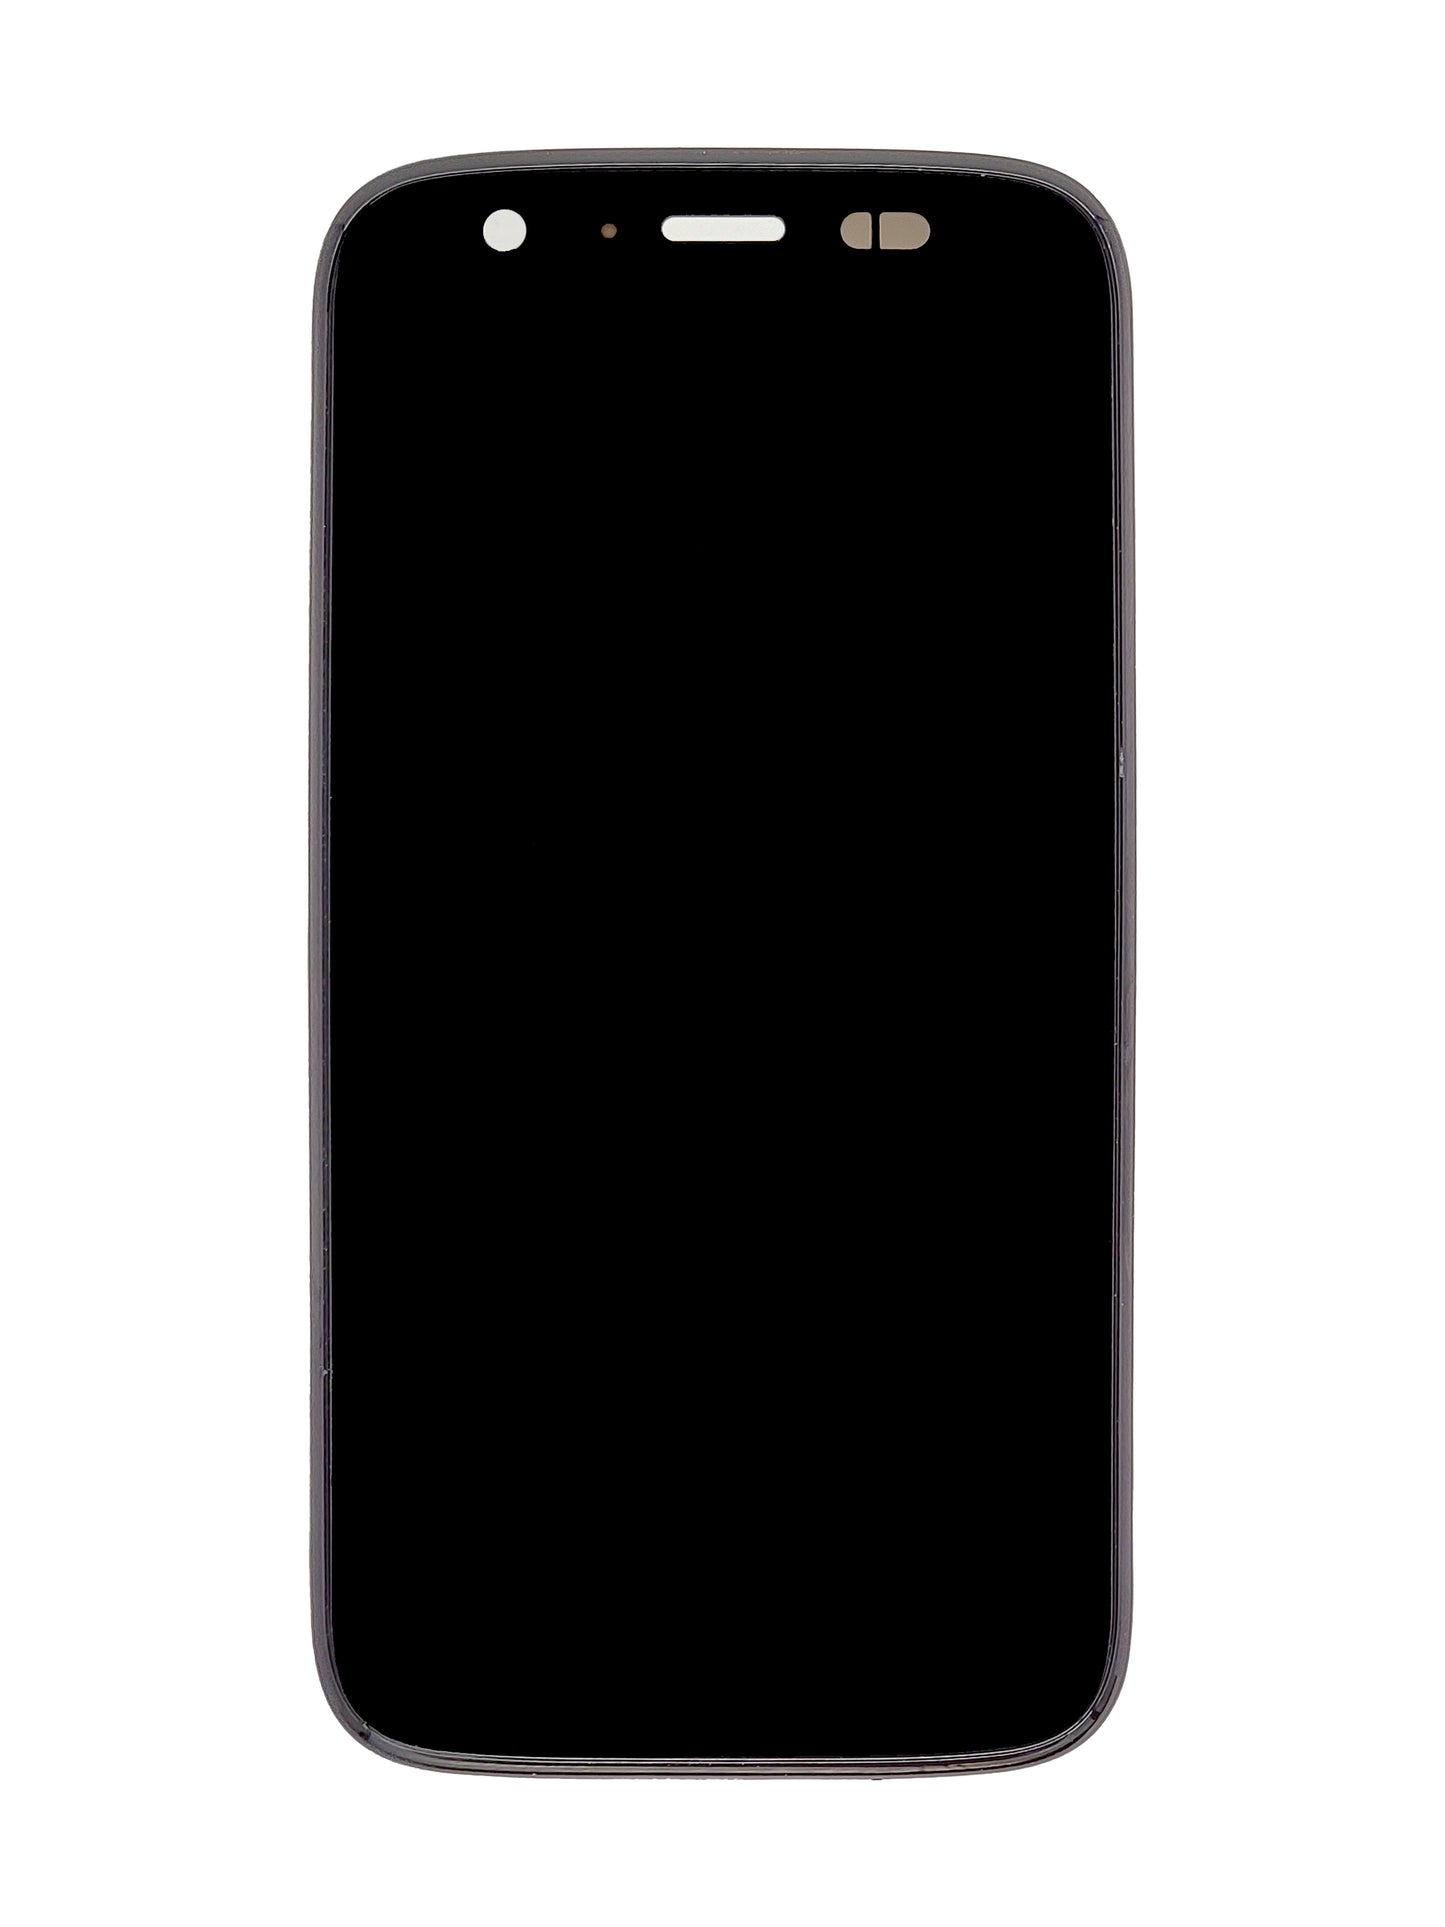 Moto G (XT1032) Screen Assembly (With The Frame) (Refurbished) (Black)